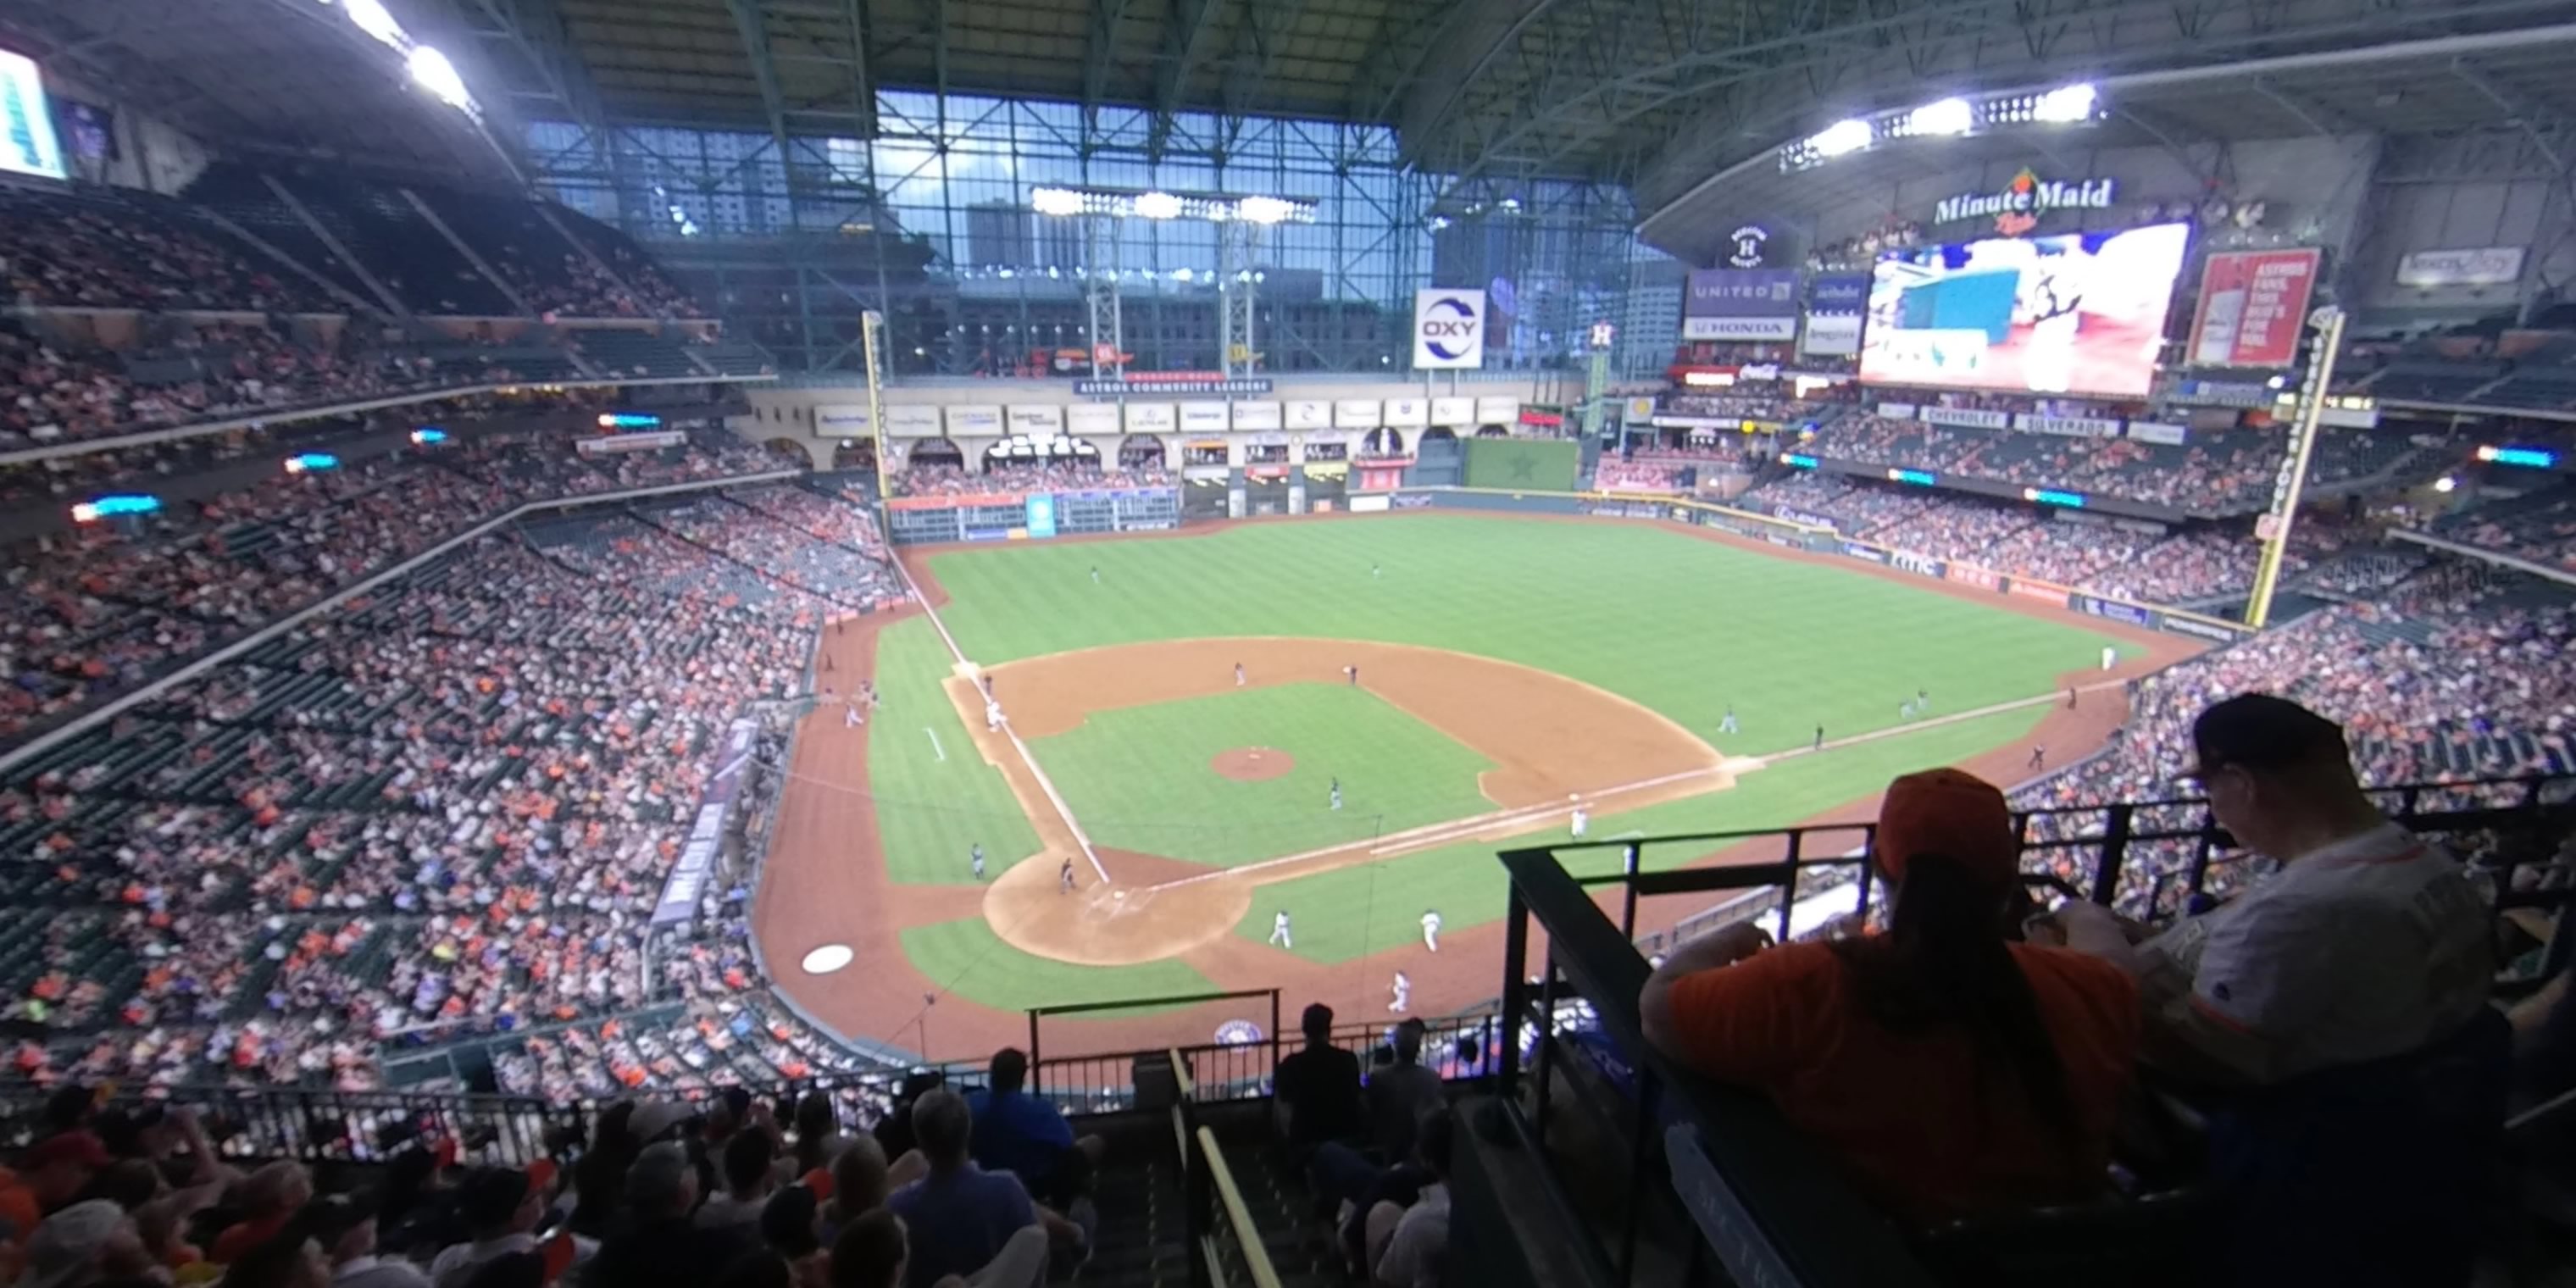 section 321 panoramic seat view  for baseball - minute maid park